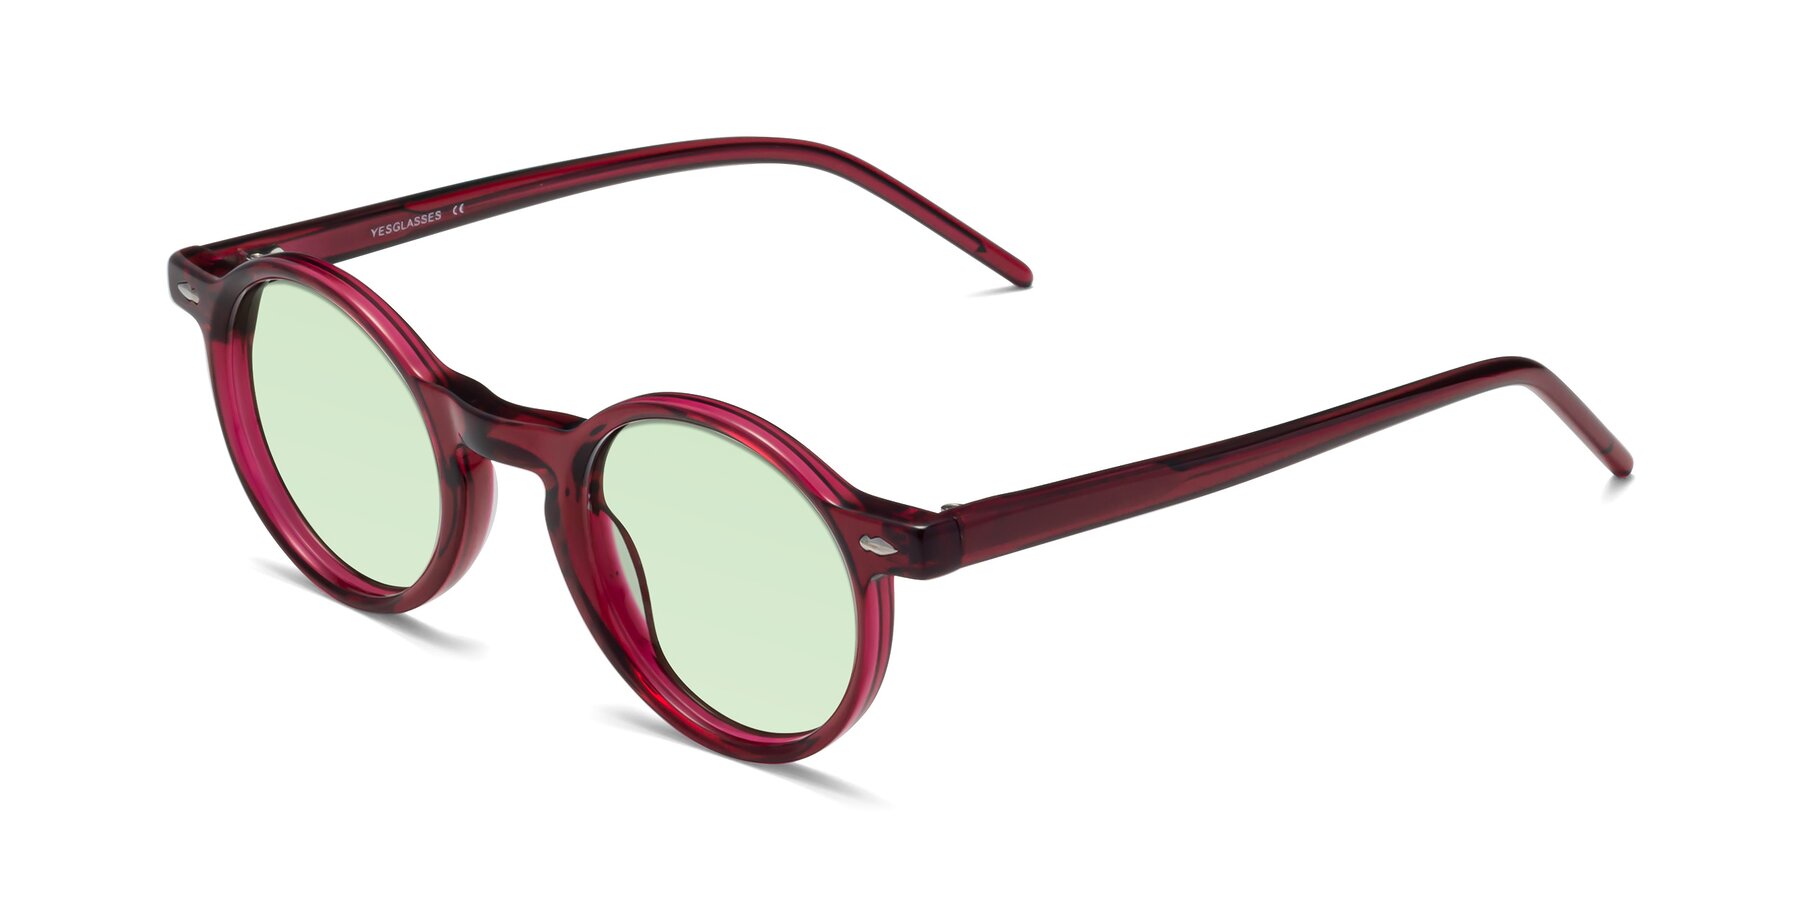 Angle of 1542 in Plum with Light Green Tinted Lenses